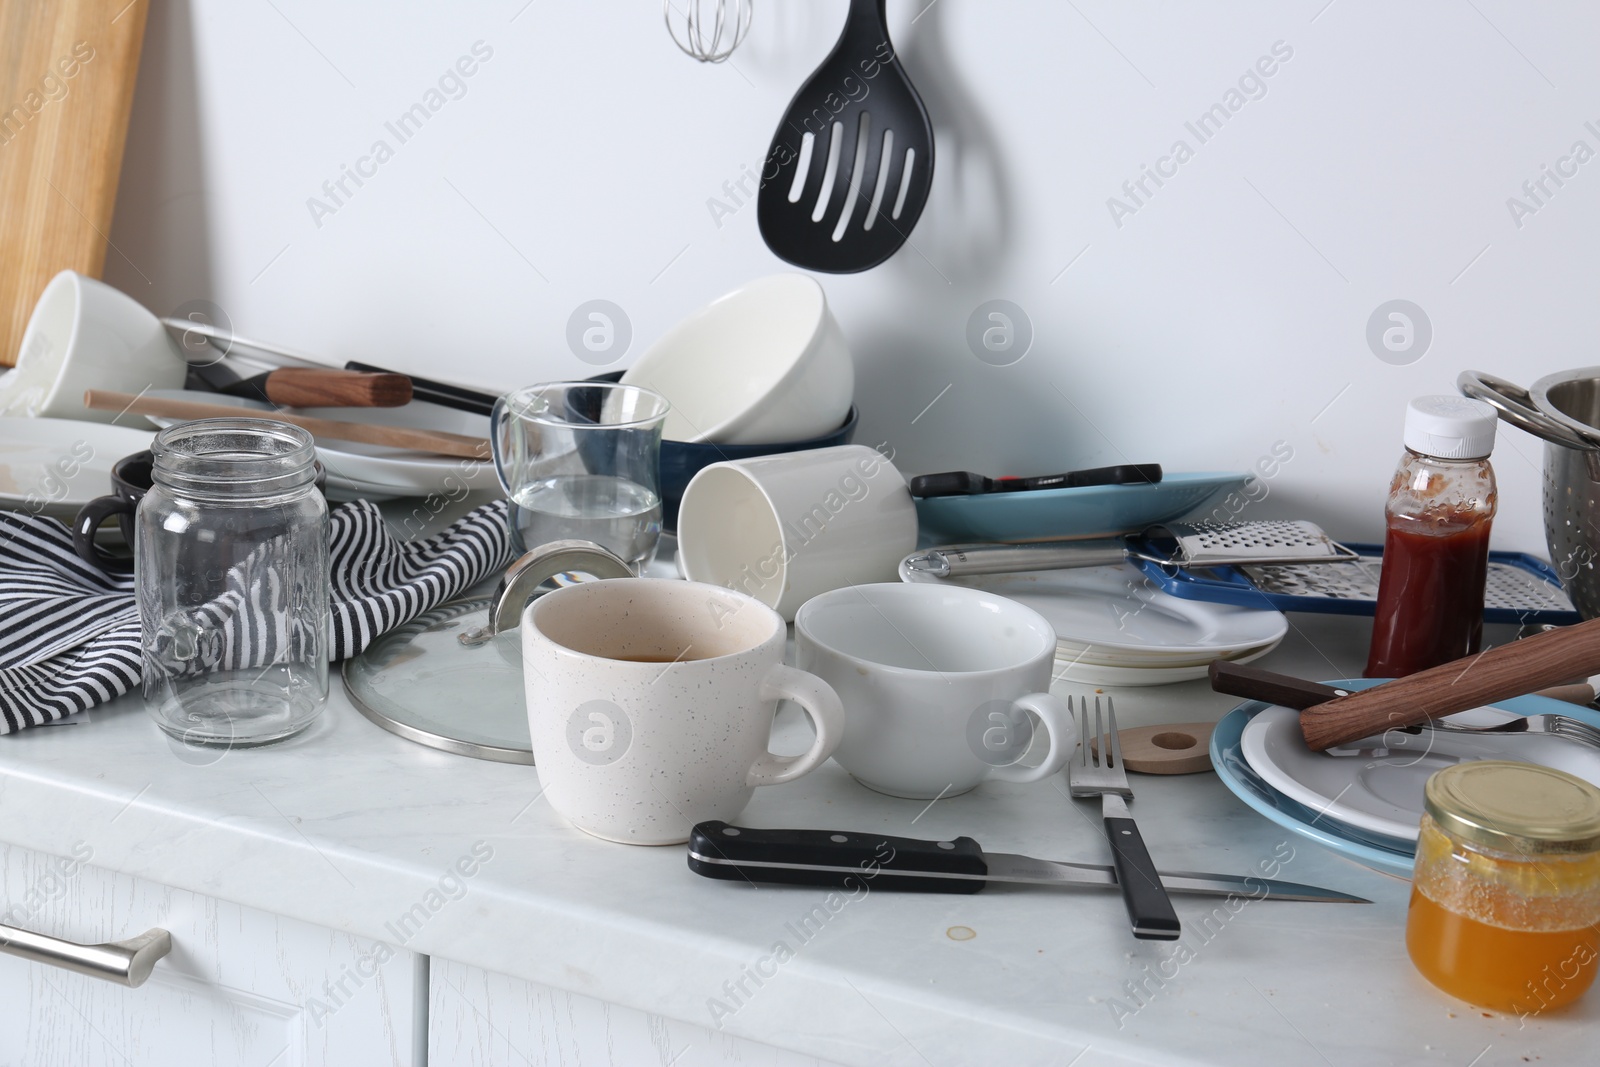 Photo of Many dirty utensils and dishware on countertop in messy kitchen